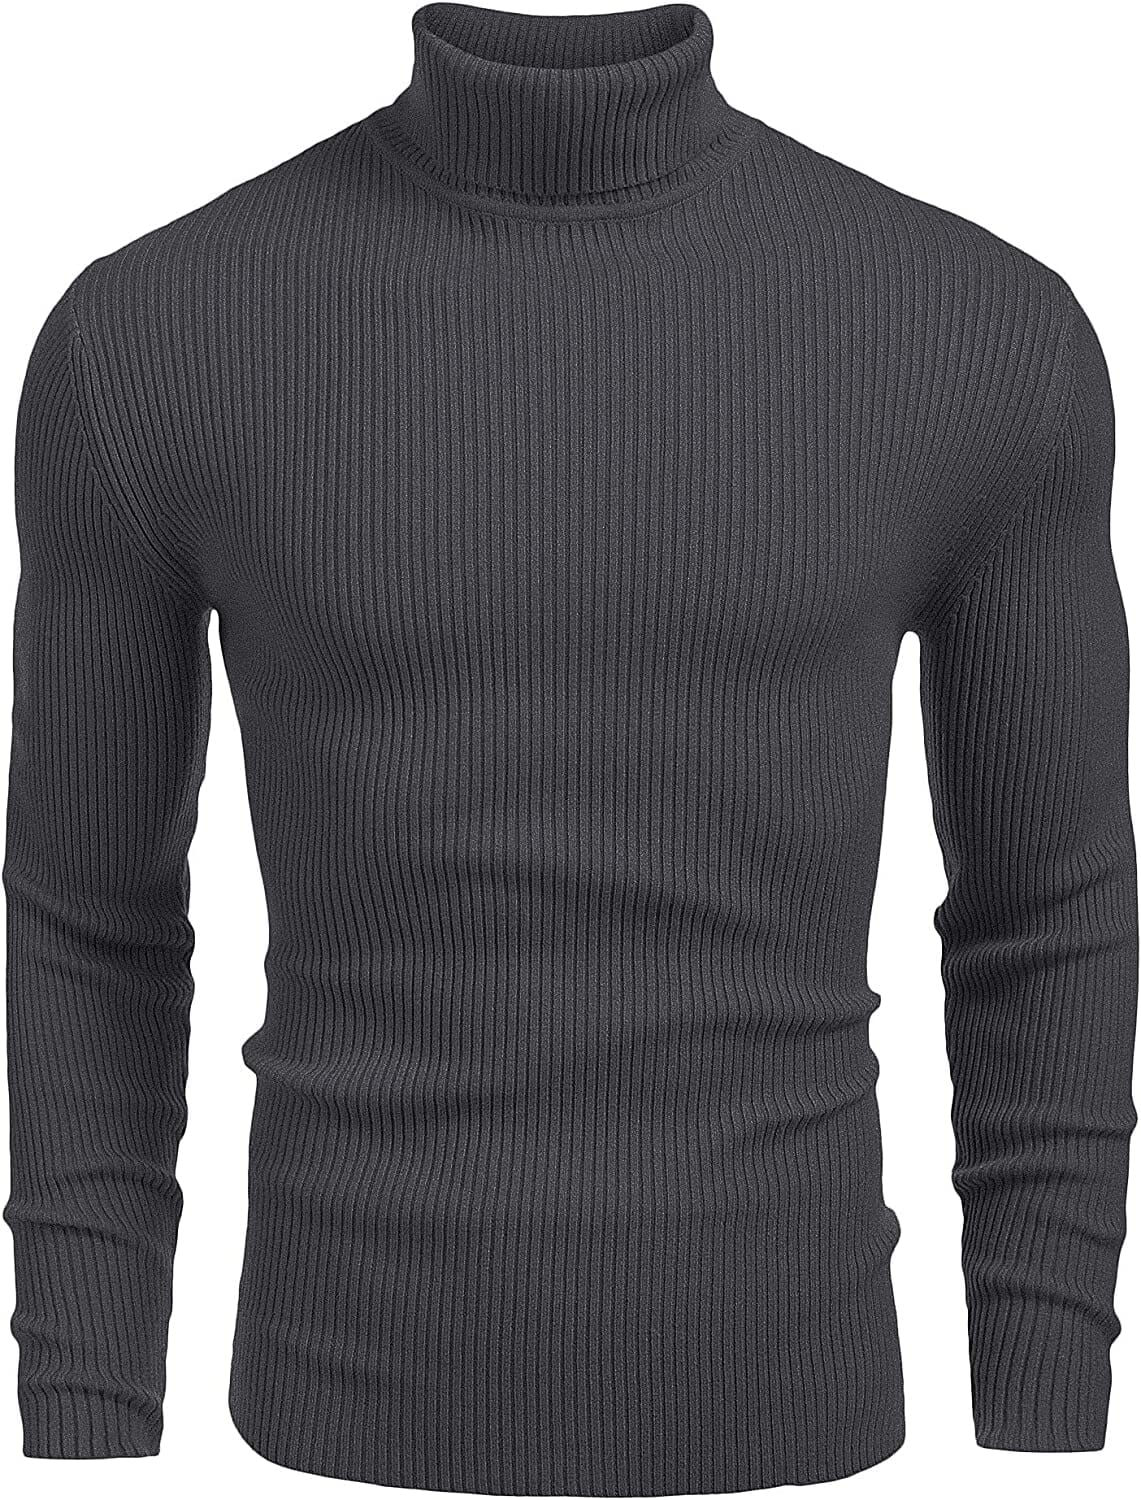 Ribbed Slim Fit Knitted Pullover Turtleneck Sweater (US Only) Sweaters COOFANDY Store Charcoal Grey S 